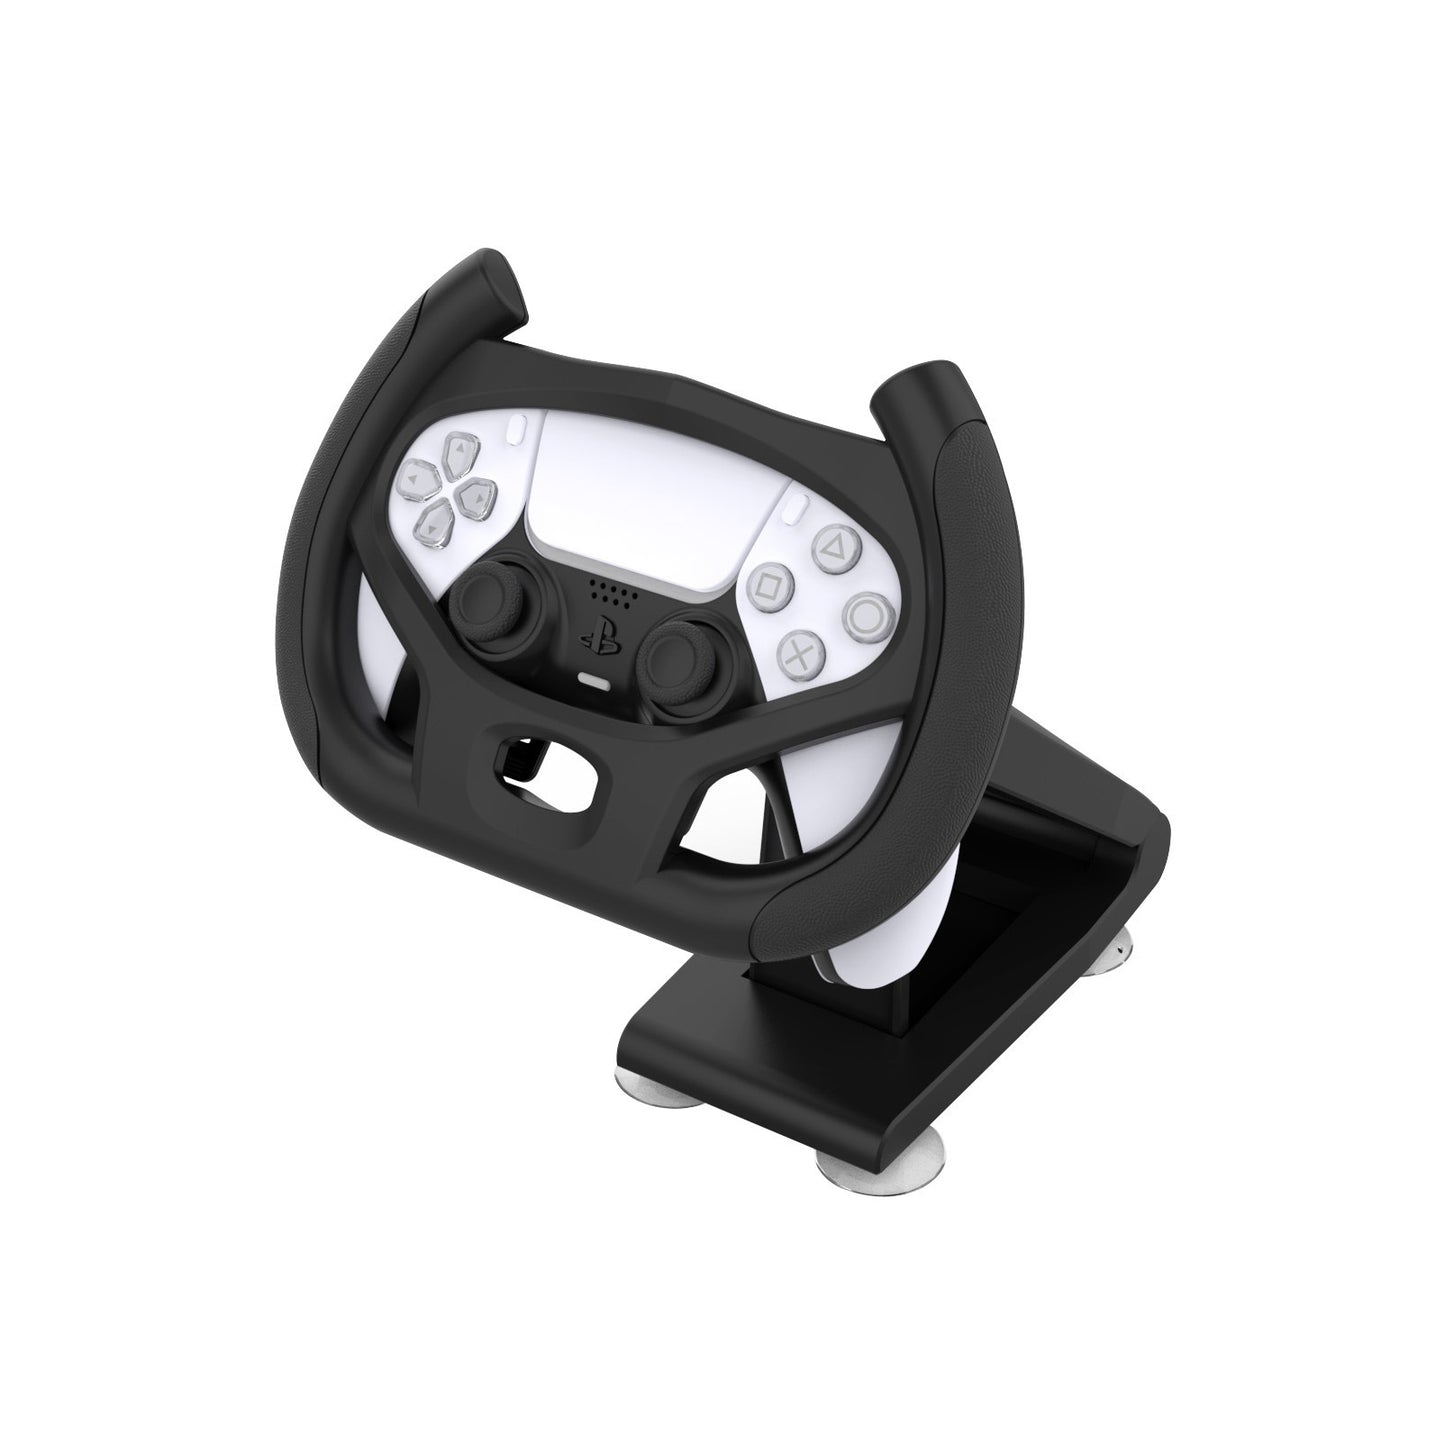 Gamepad Steering Wheel Bracket With Suction Cup